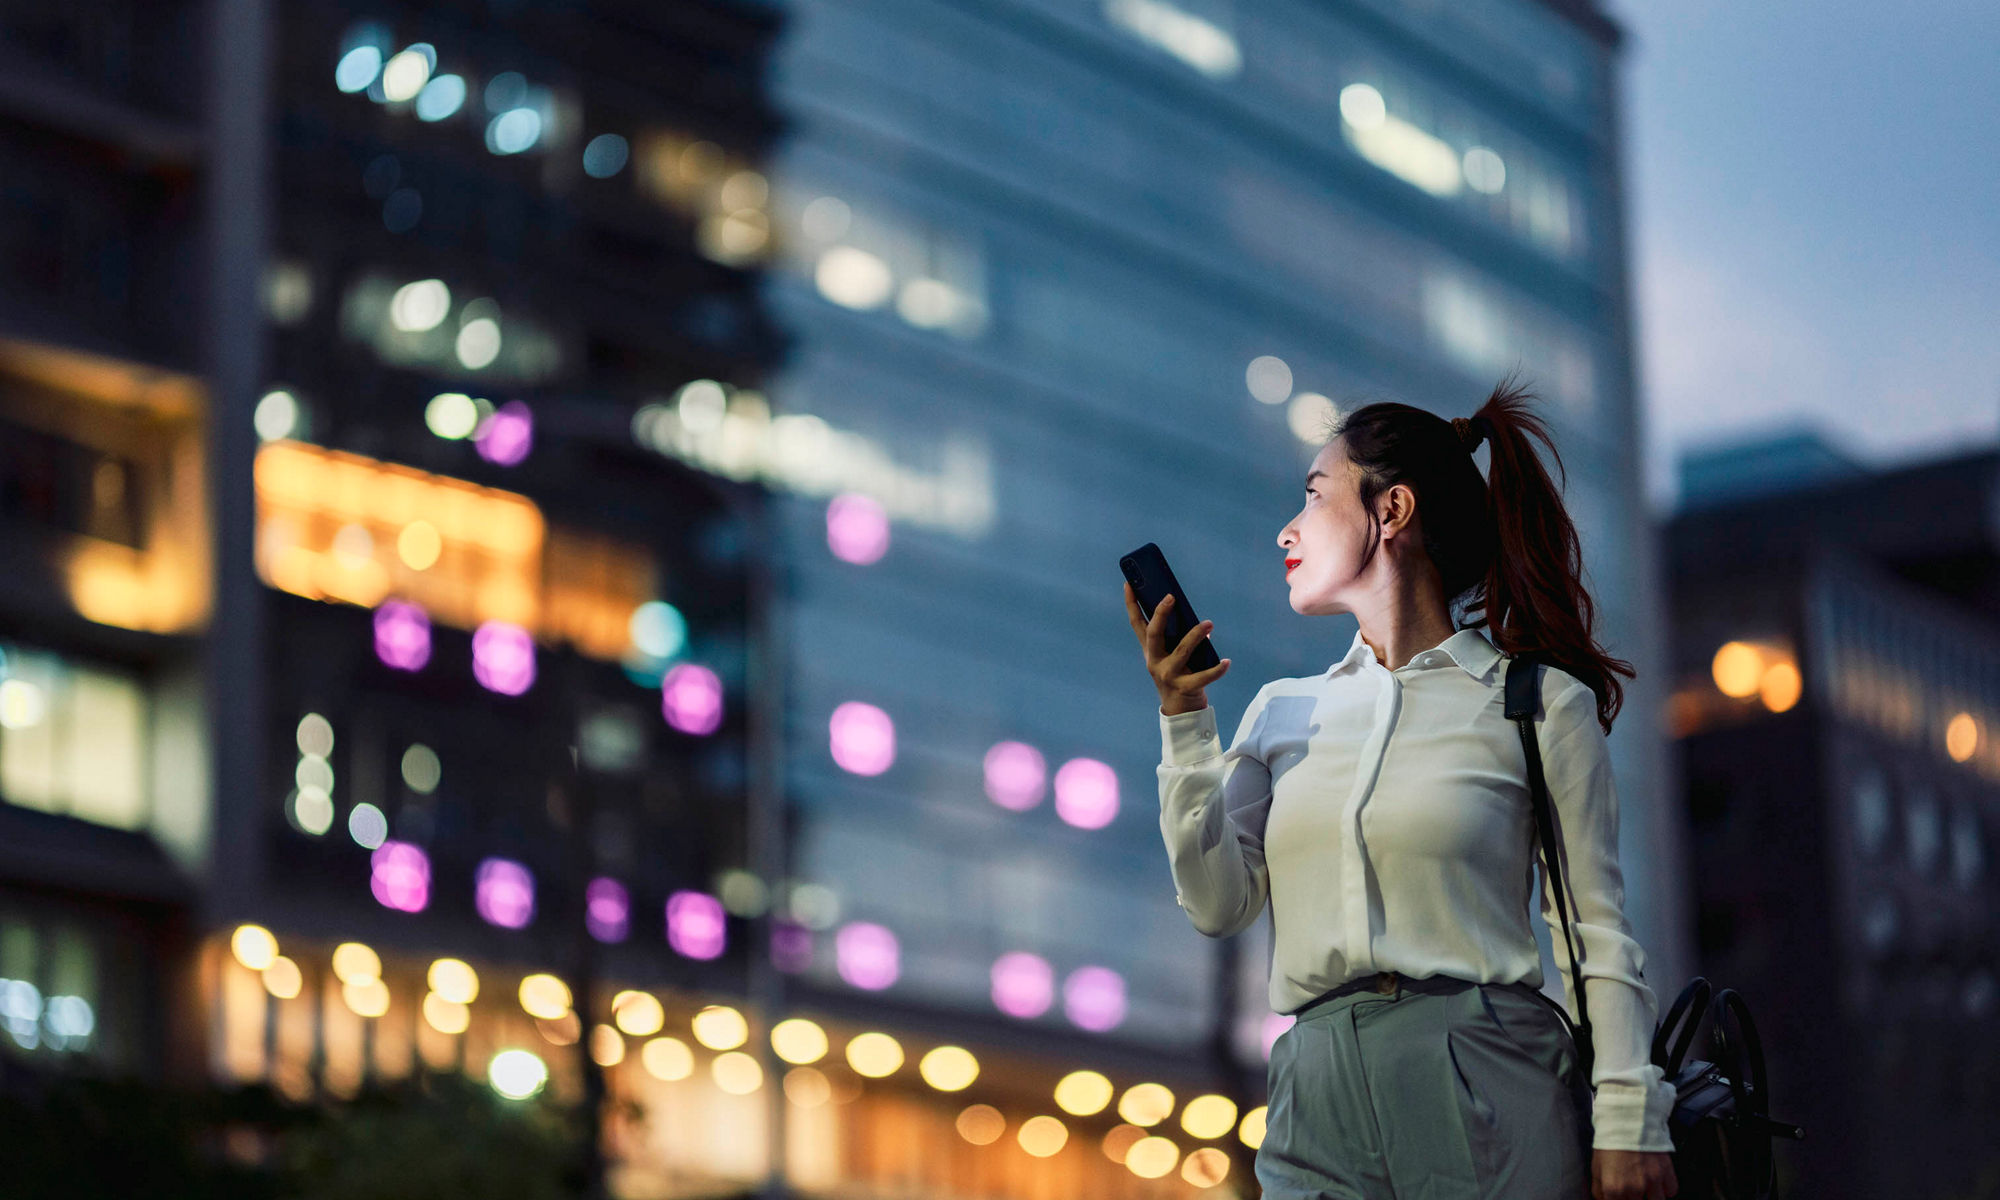 Evening view of city scape over the shoulder of a dark haired woman taking a picture with a mobile device 